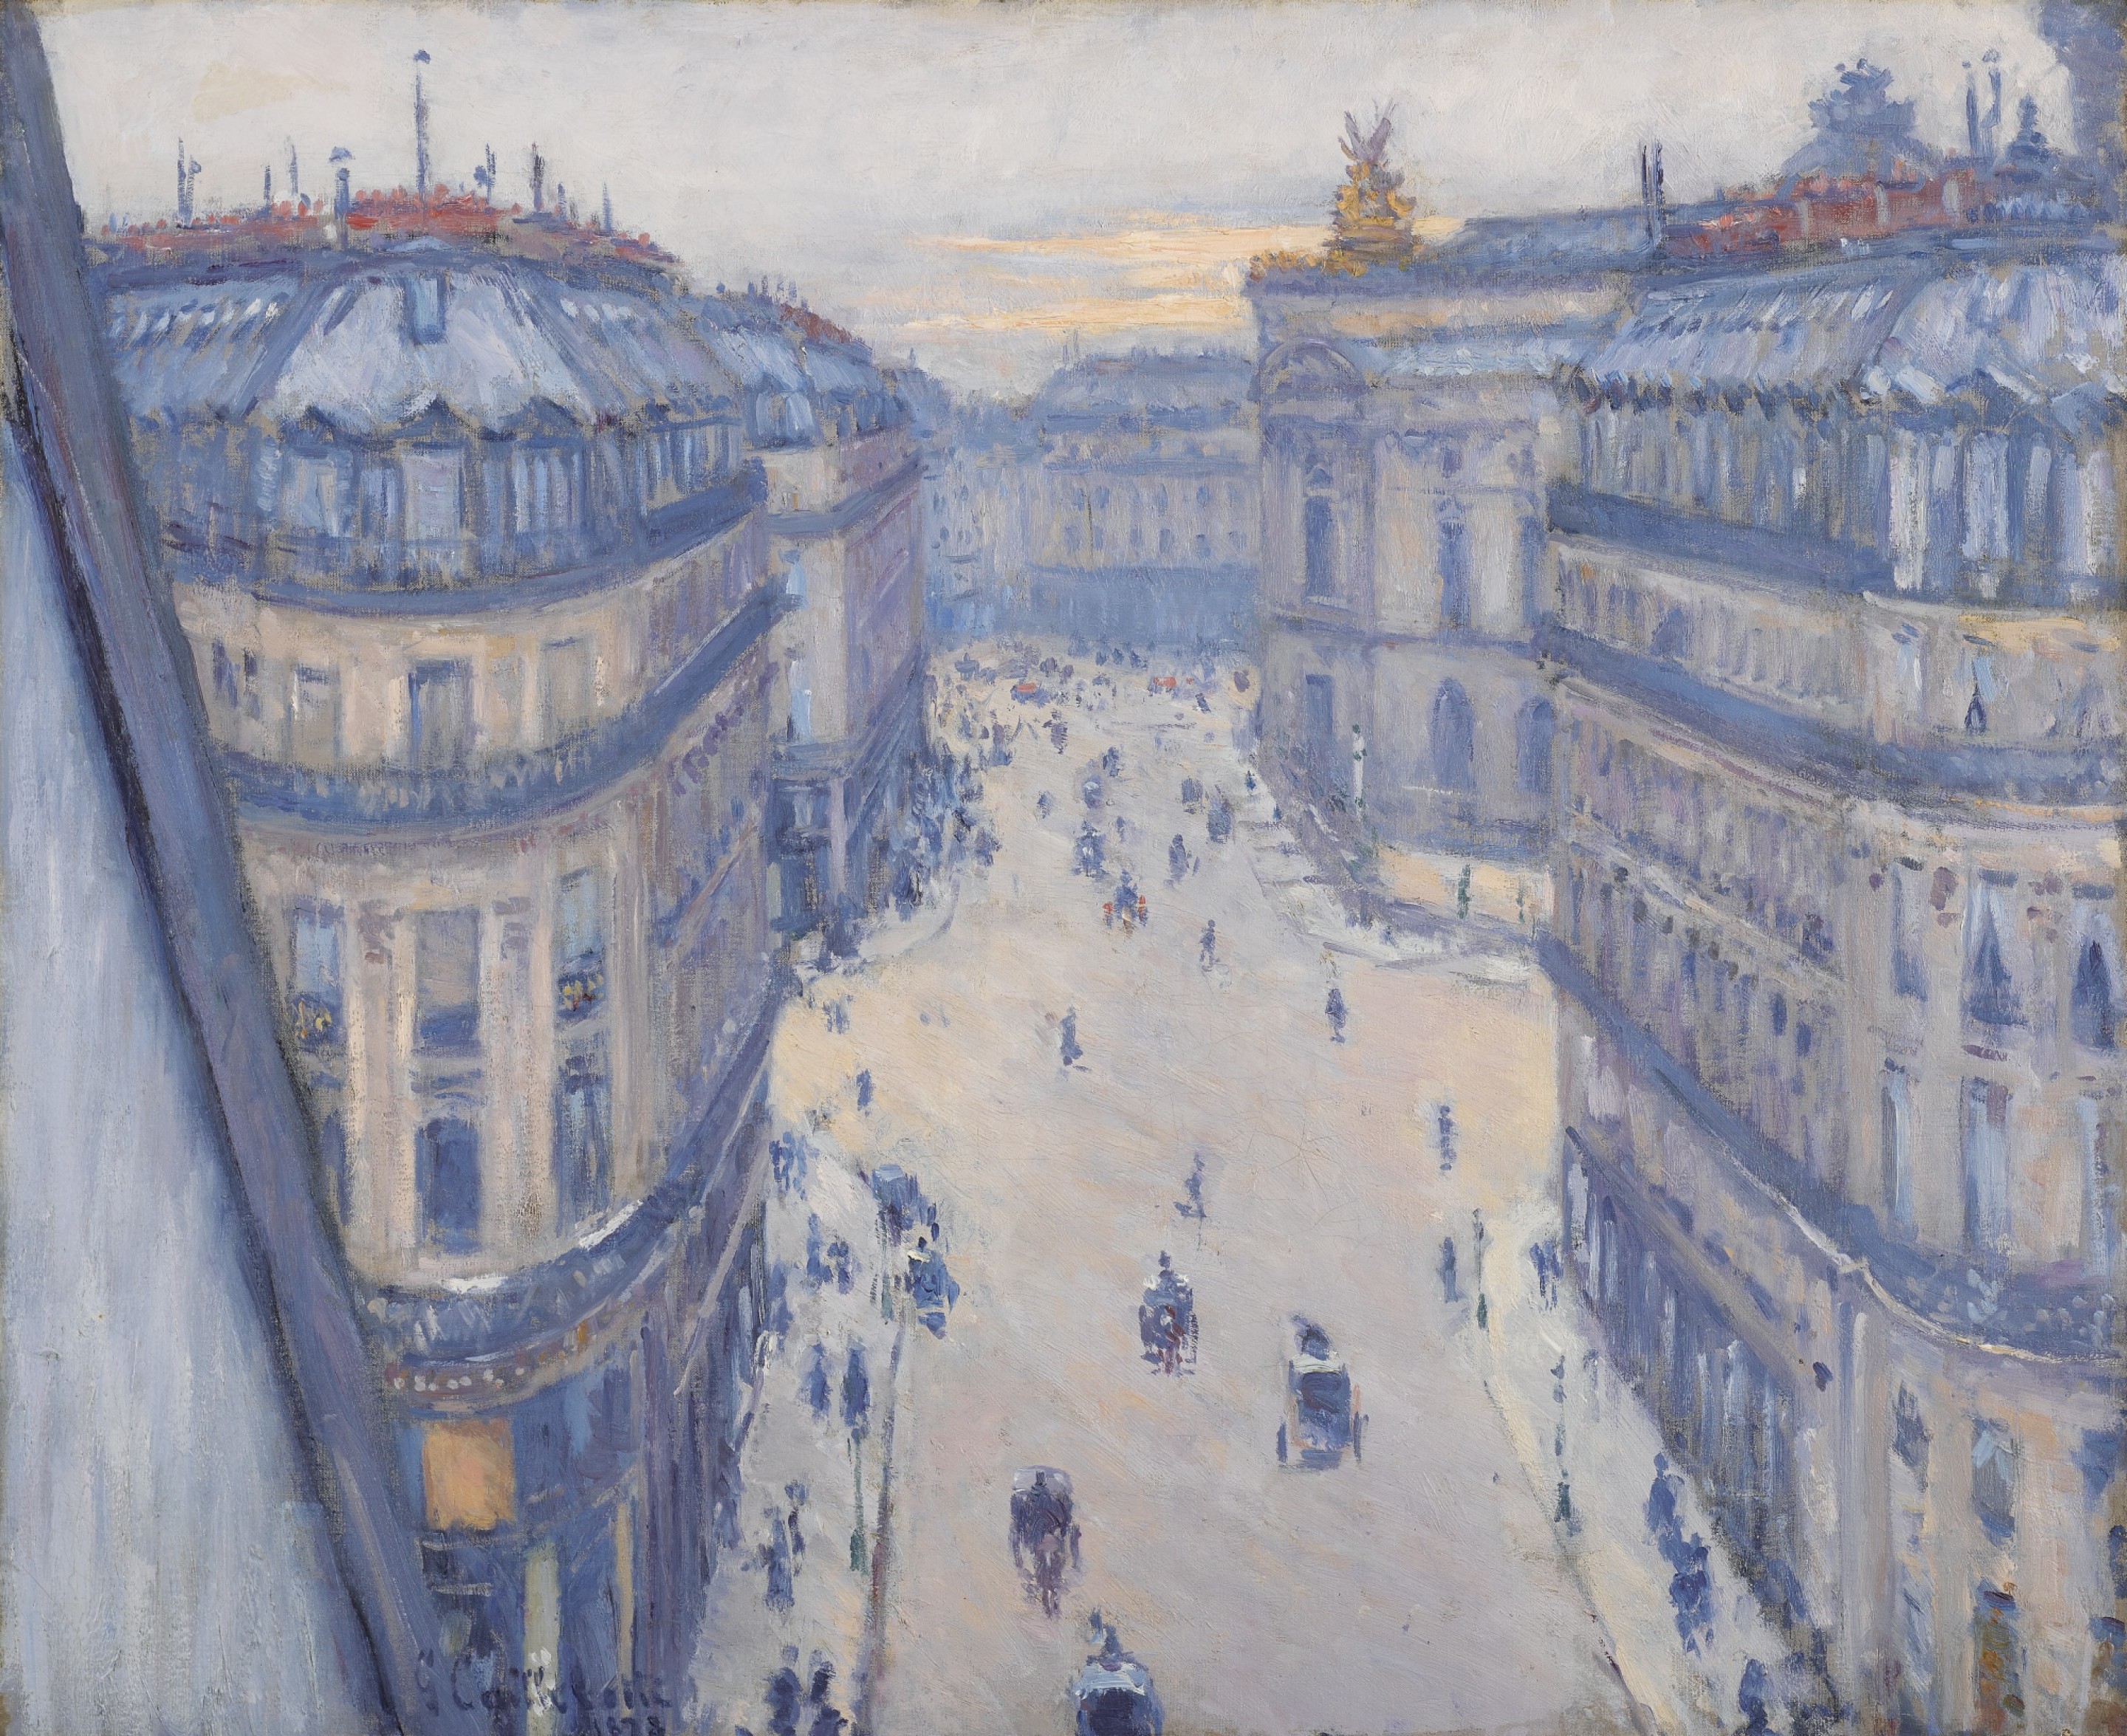 Rue Halévy, View from the Sixth Floor by Gustave Caillebotte - 1878 - 59,5 x 73 cm private collection